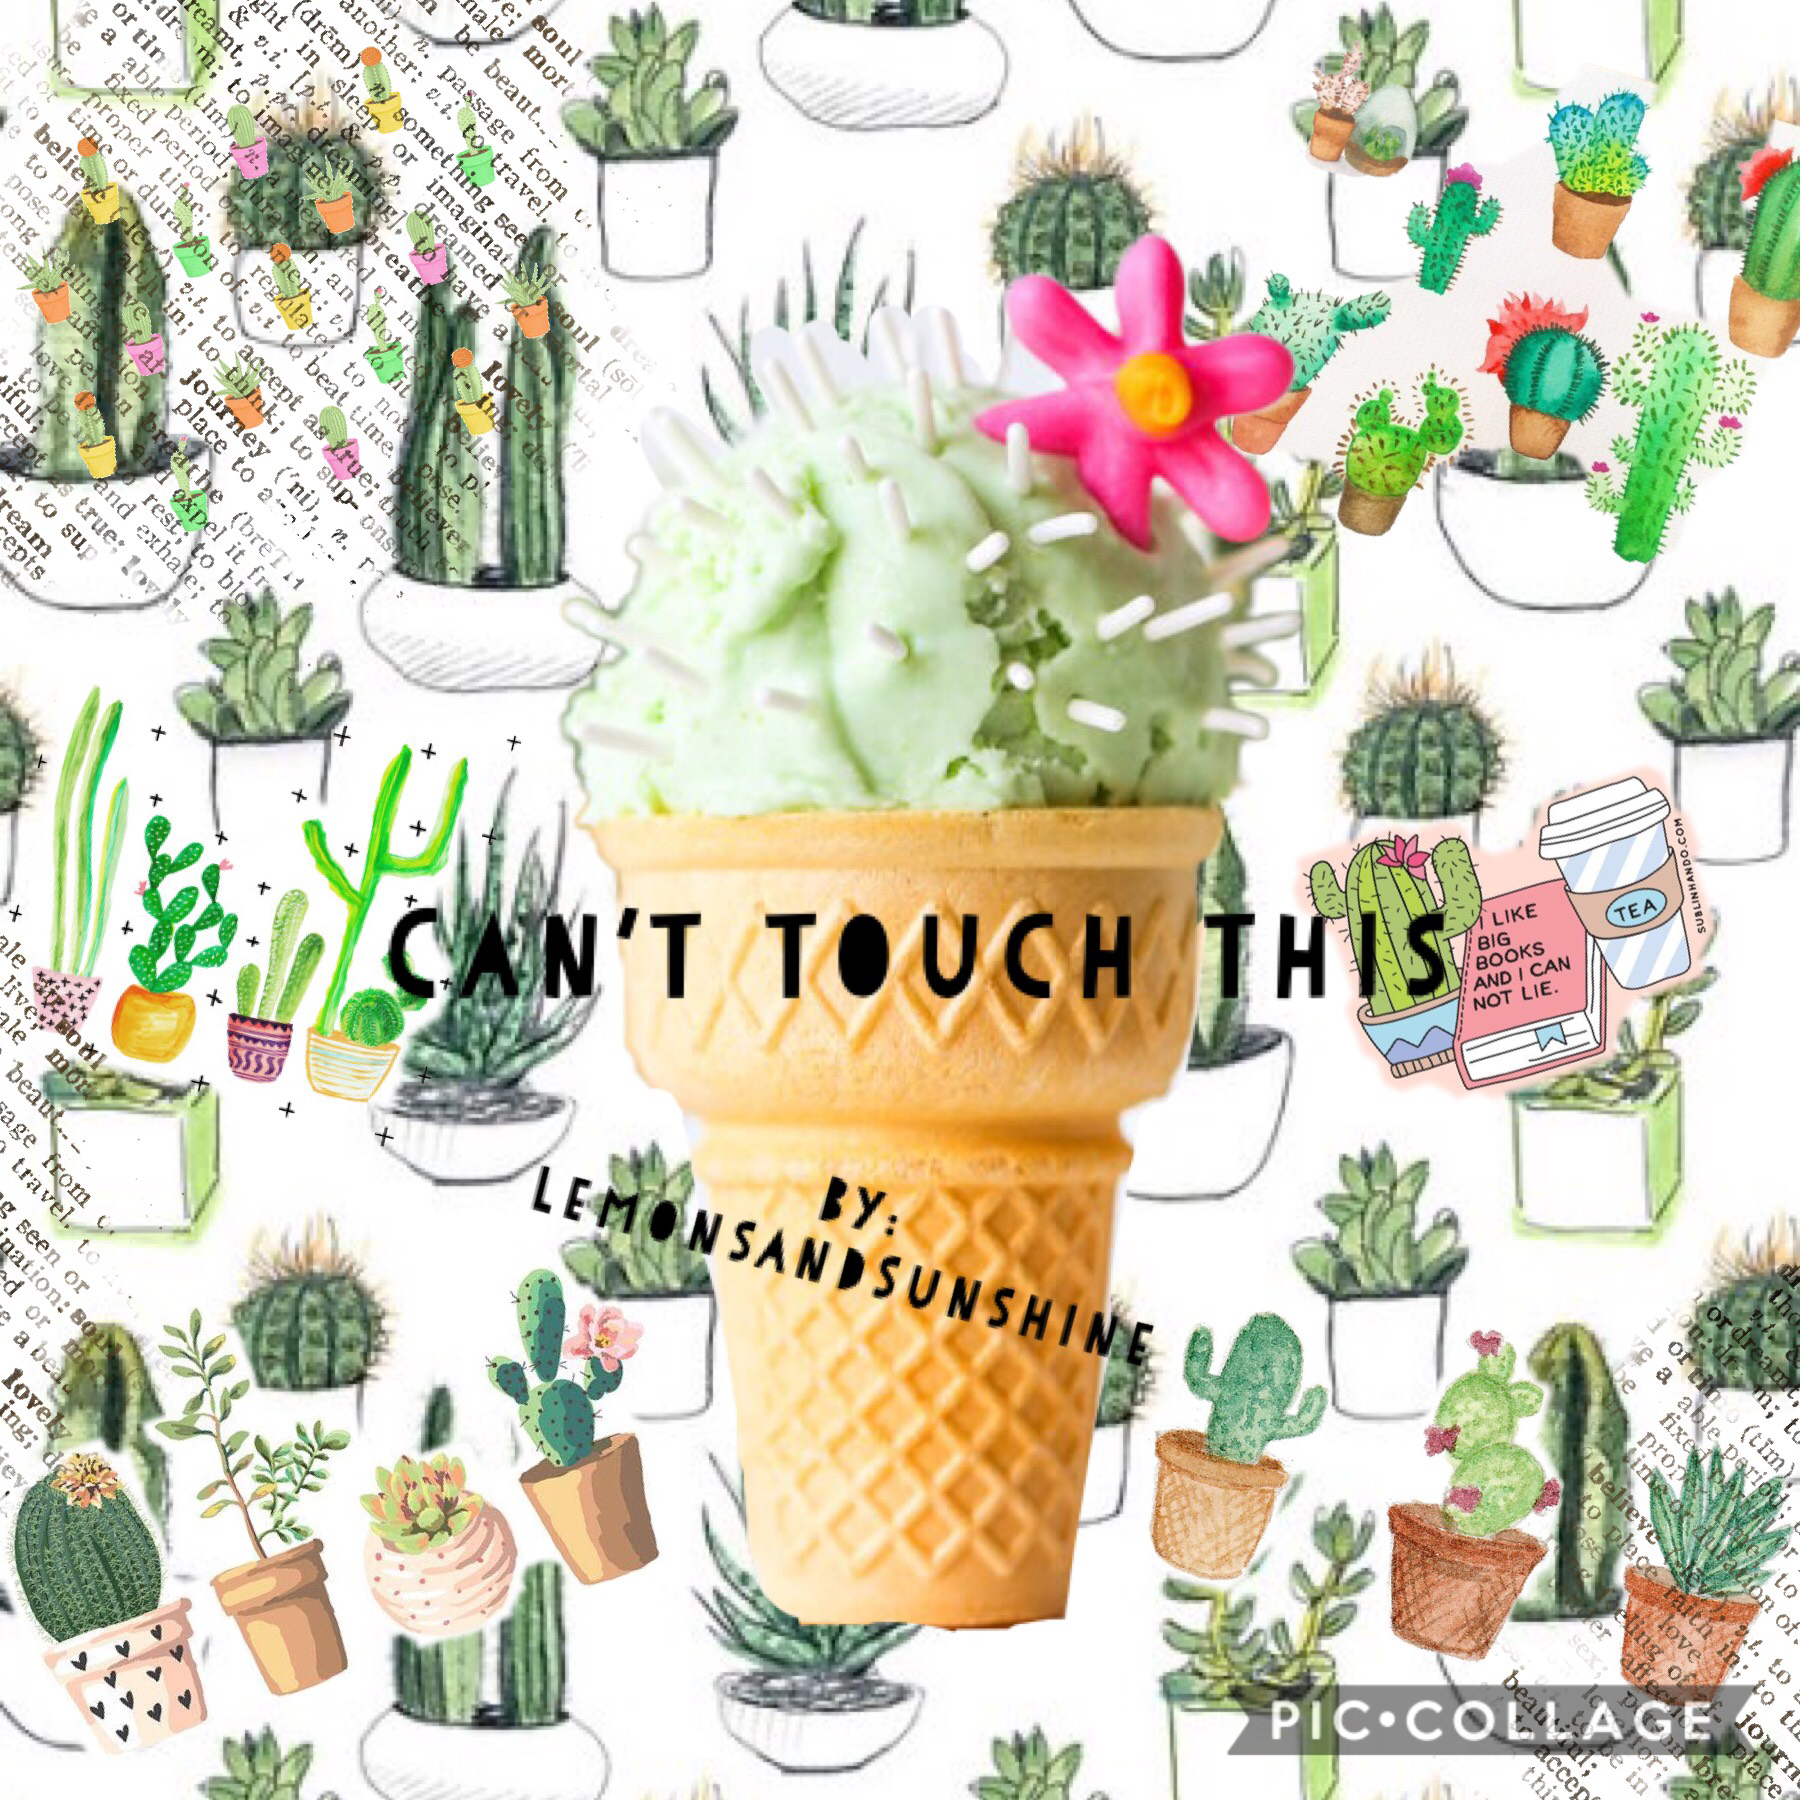 I’m craving some ice cream now, or should I say some cactus 🌵 ice cream